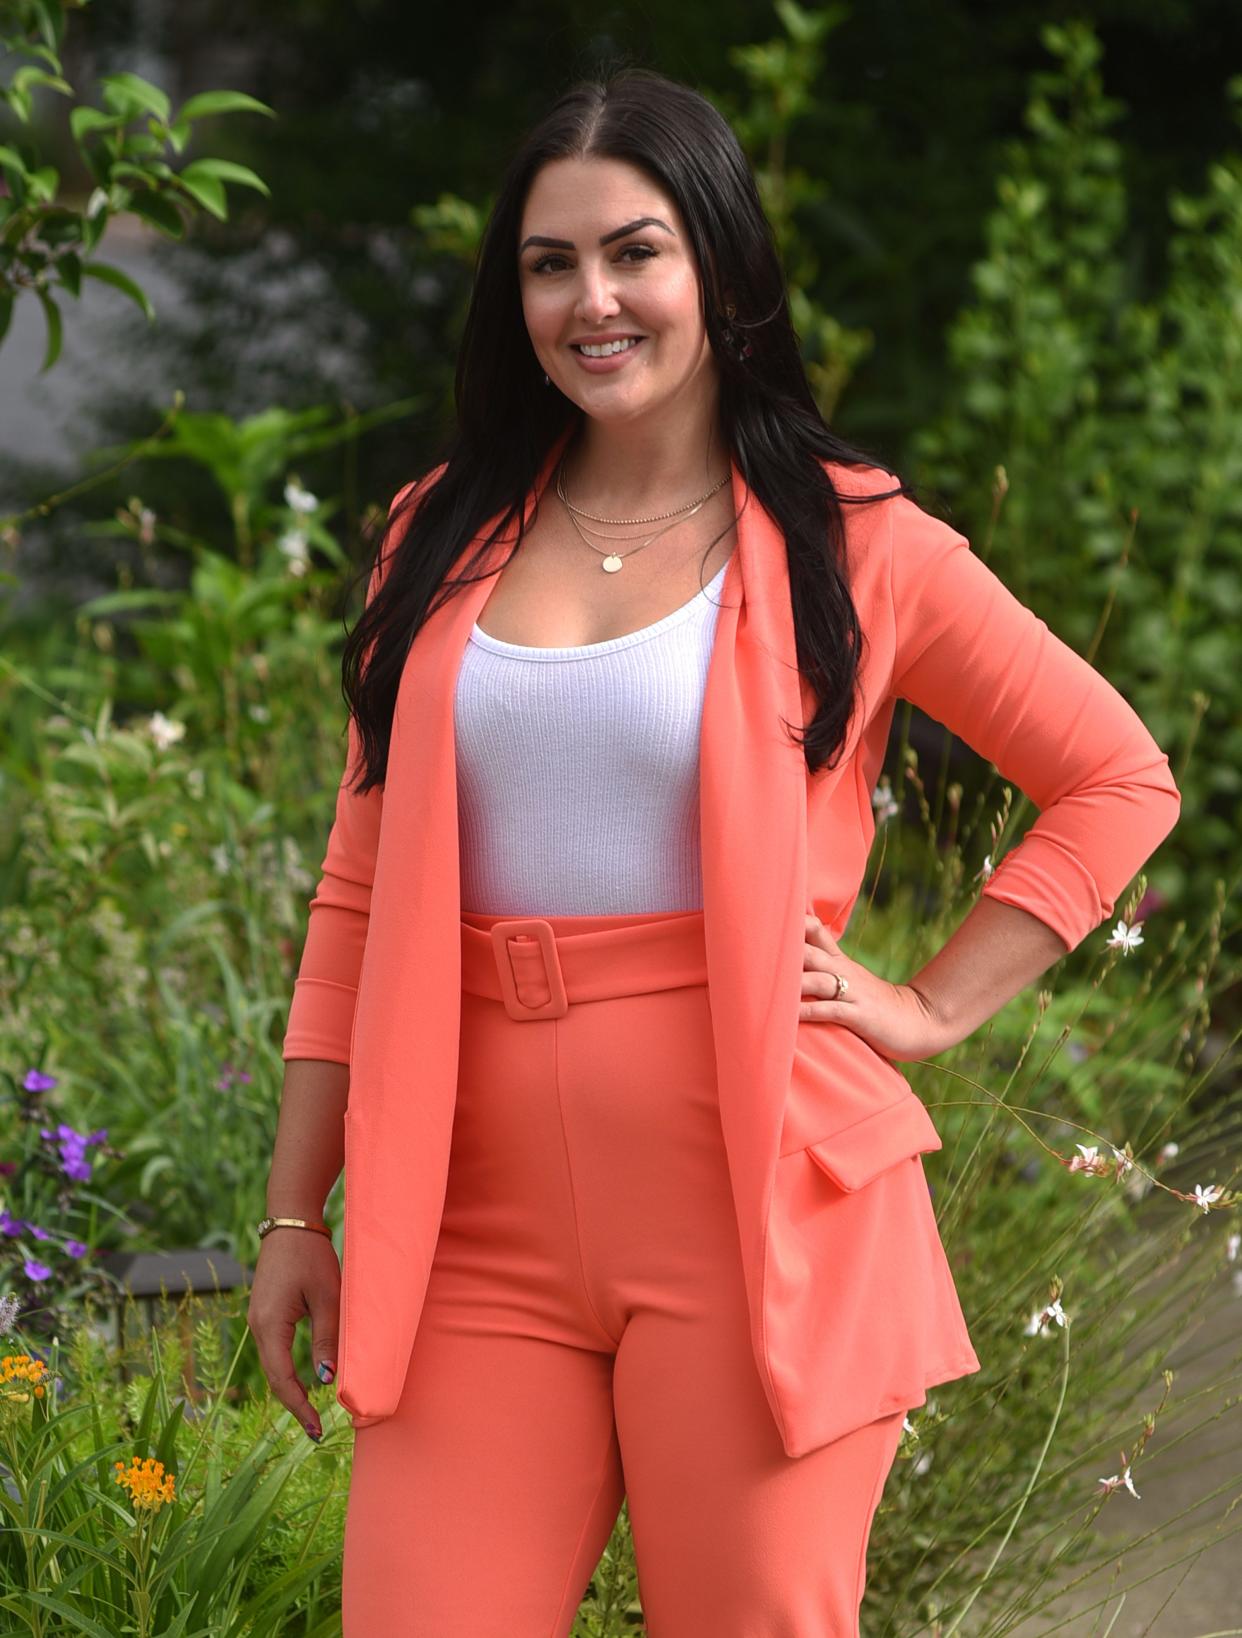 Vanessa A. Gonzalez, President/Attorney with The Law Office of Vanessa A. Gonzalez, stands next to her office in Wilmington, N.C., Wednesday, June 23, 2021. Gonzalez is one of the StarNews 40 Under 40 honorees for 2021.